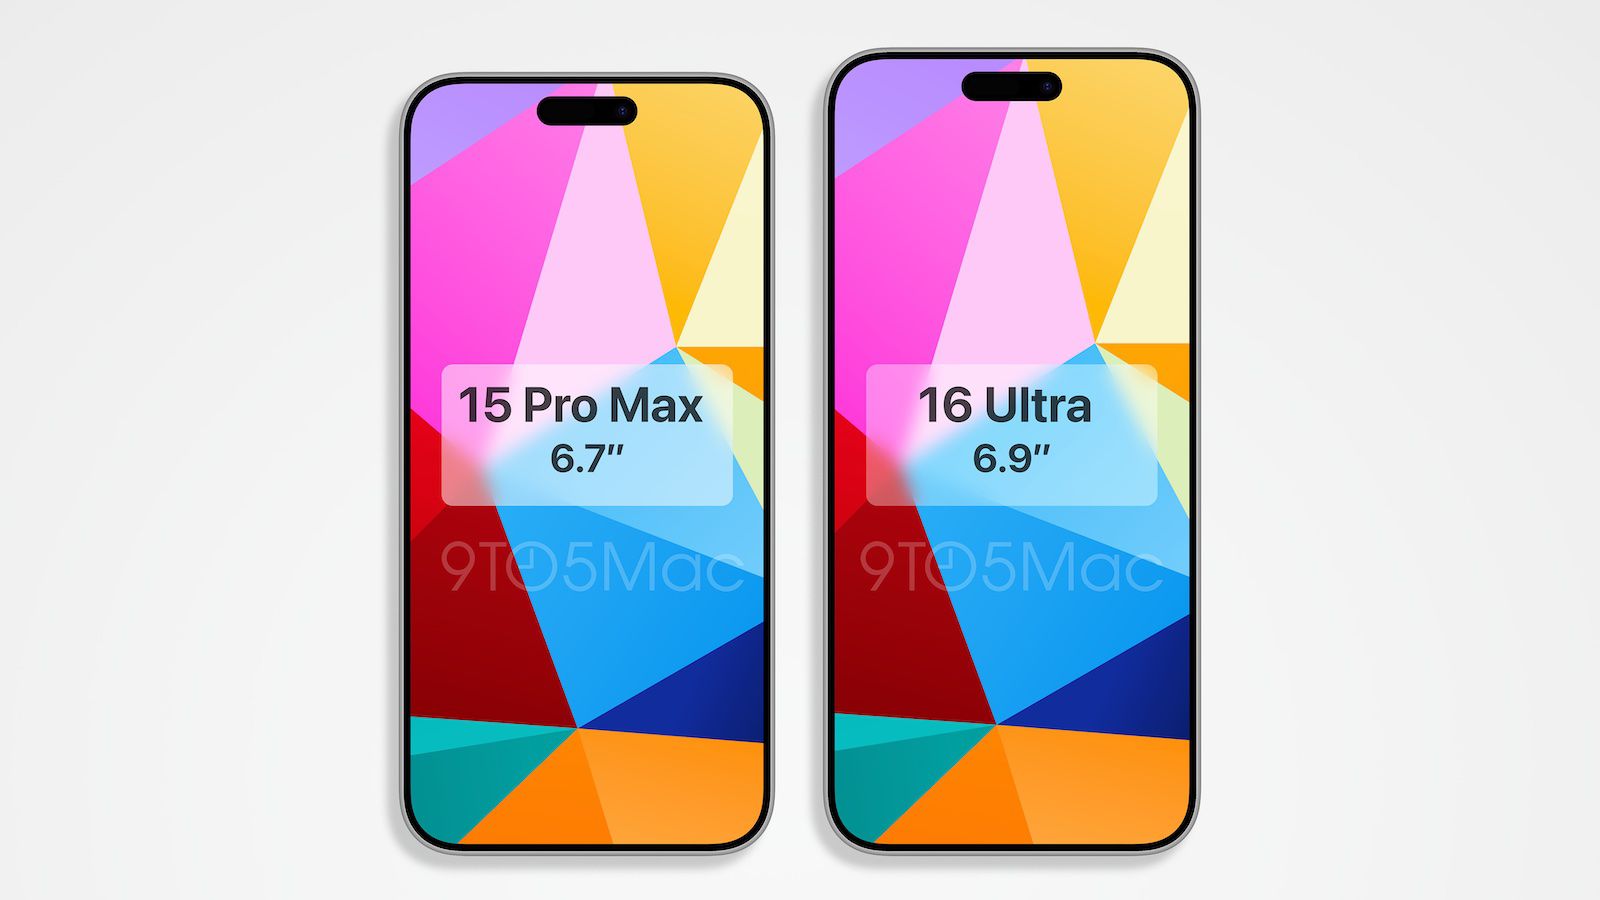 Should you buy the iPhone Pro 15 Max or wait for the iPhone 16 Pro Max?